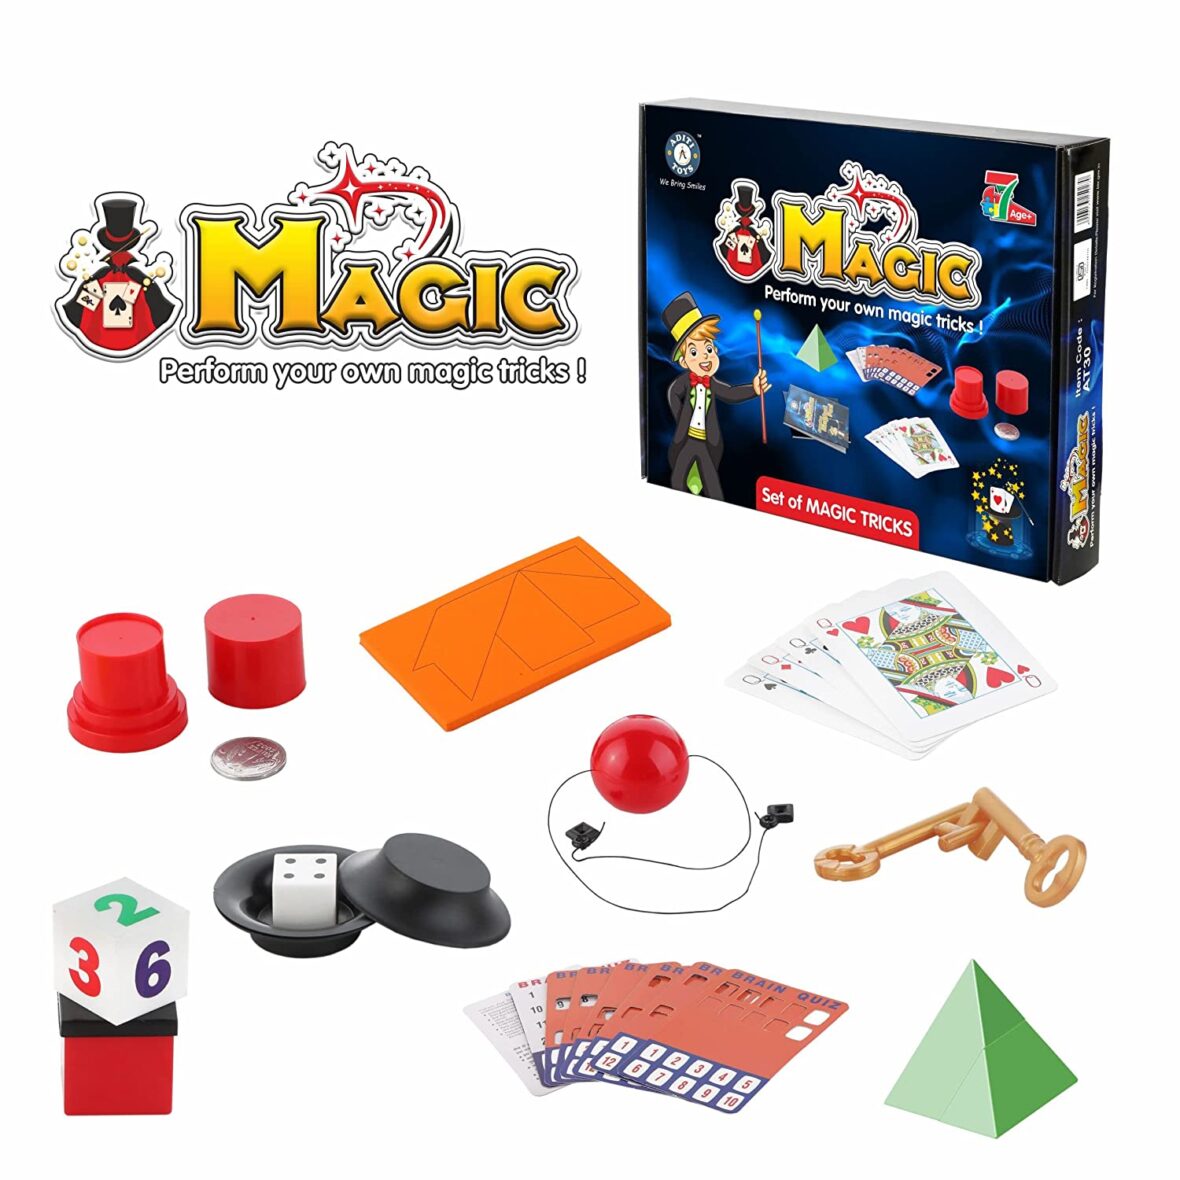 Magic Tricks Games to Perform 10+ Magic Tricks for Friends and Family